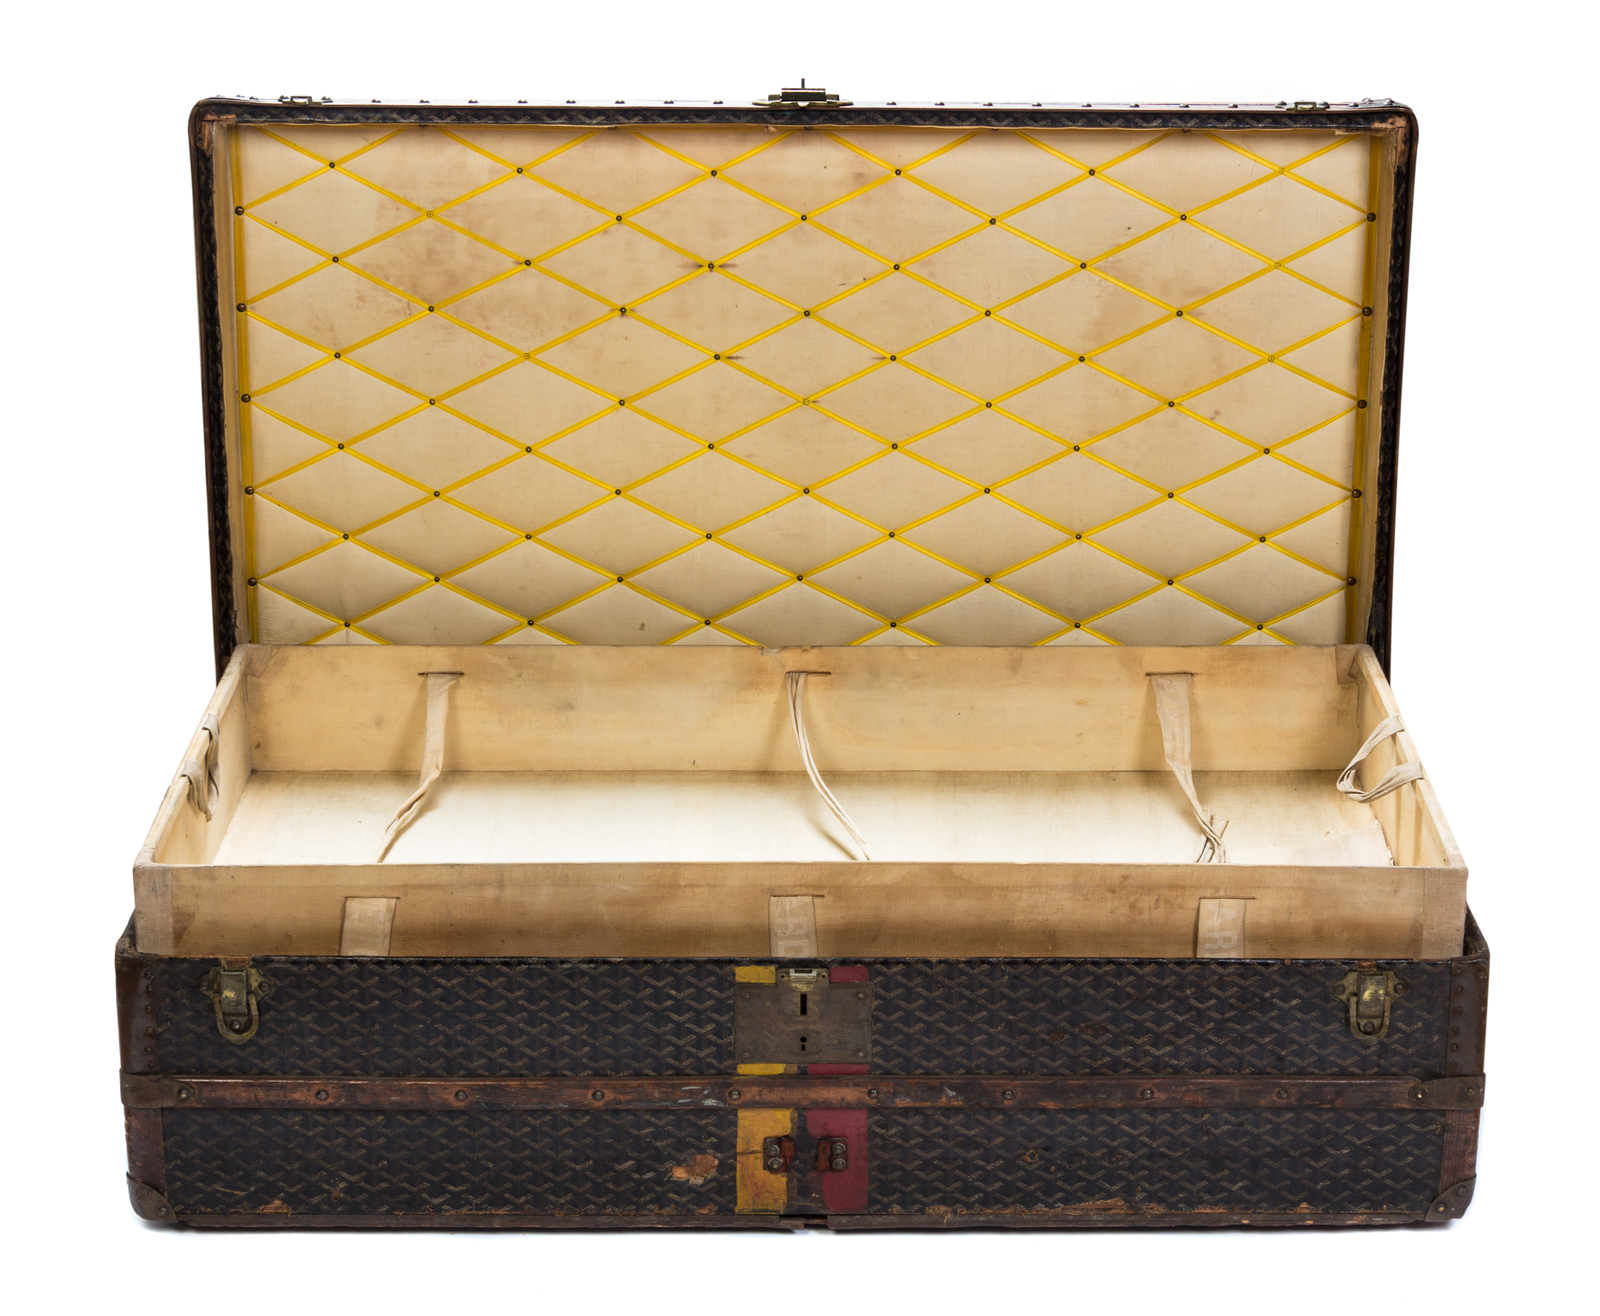 Sold at Auction: LOUIS VUITTON STEAMER TRUNK Exterior with all